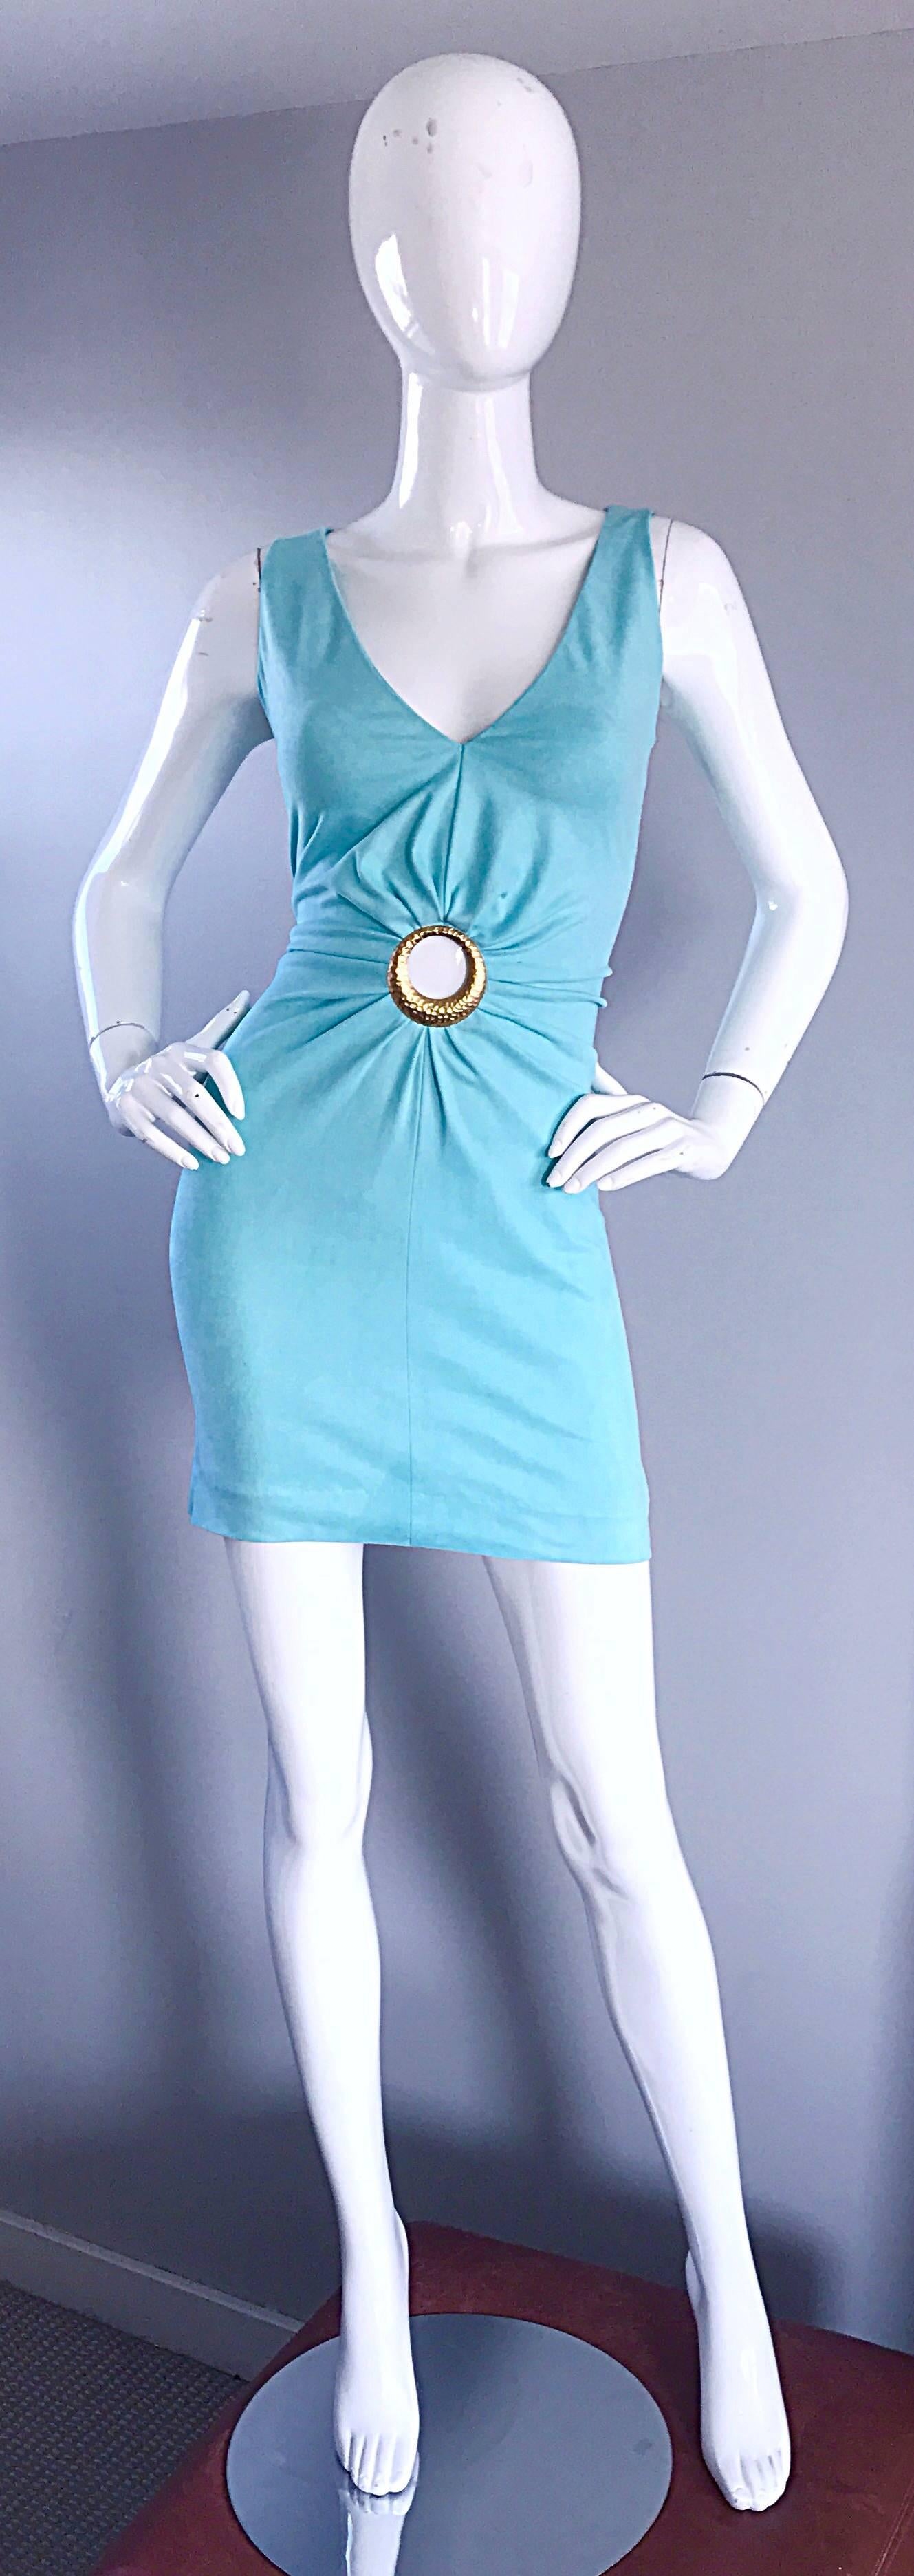 Rare 90s IKITO robins egg blue / light turquoise sexy mini dress! Soft rayon blend hugs the body in all the right place, and stretches to fit. Hammered gold cut-out rin above the bust. Stretches to fit an array of sizes. Hidden zipper up the back